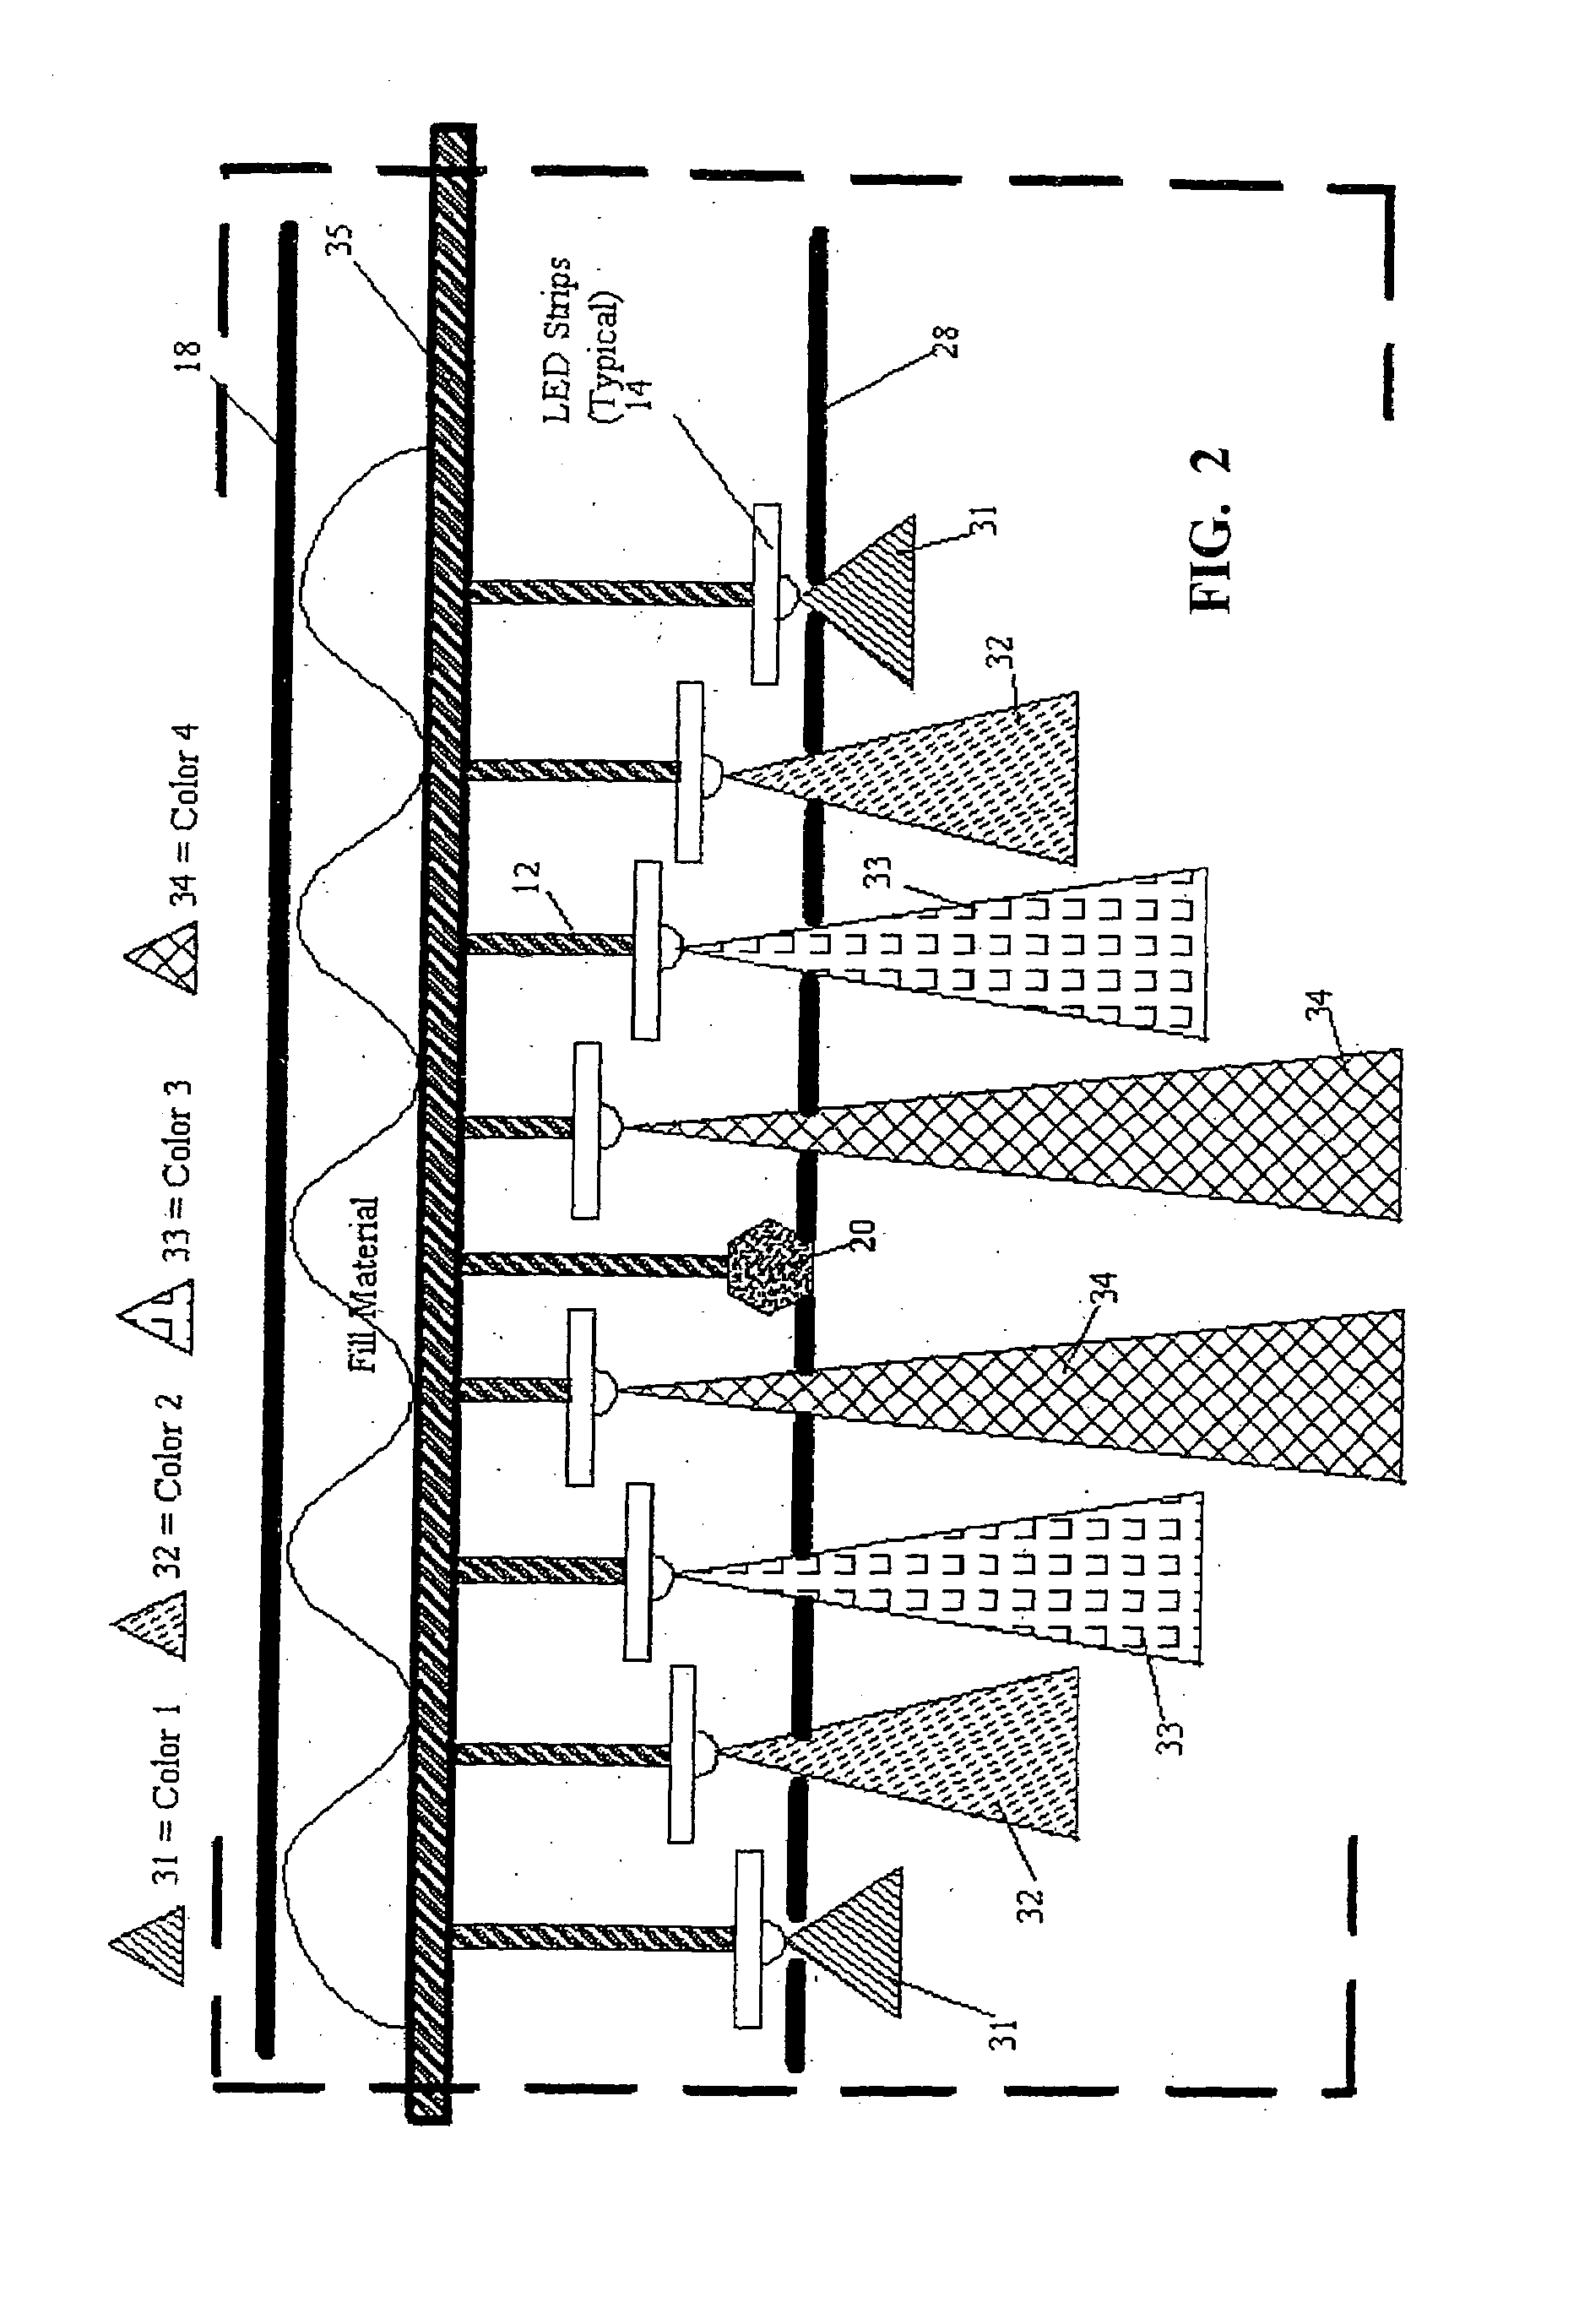 Phototherapy device and method of use